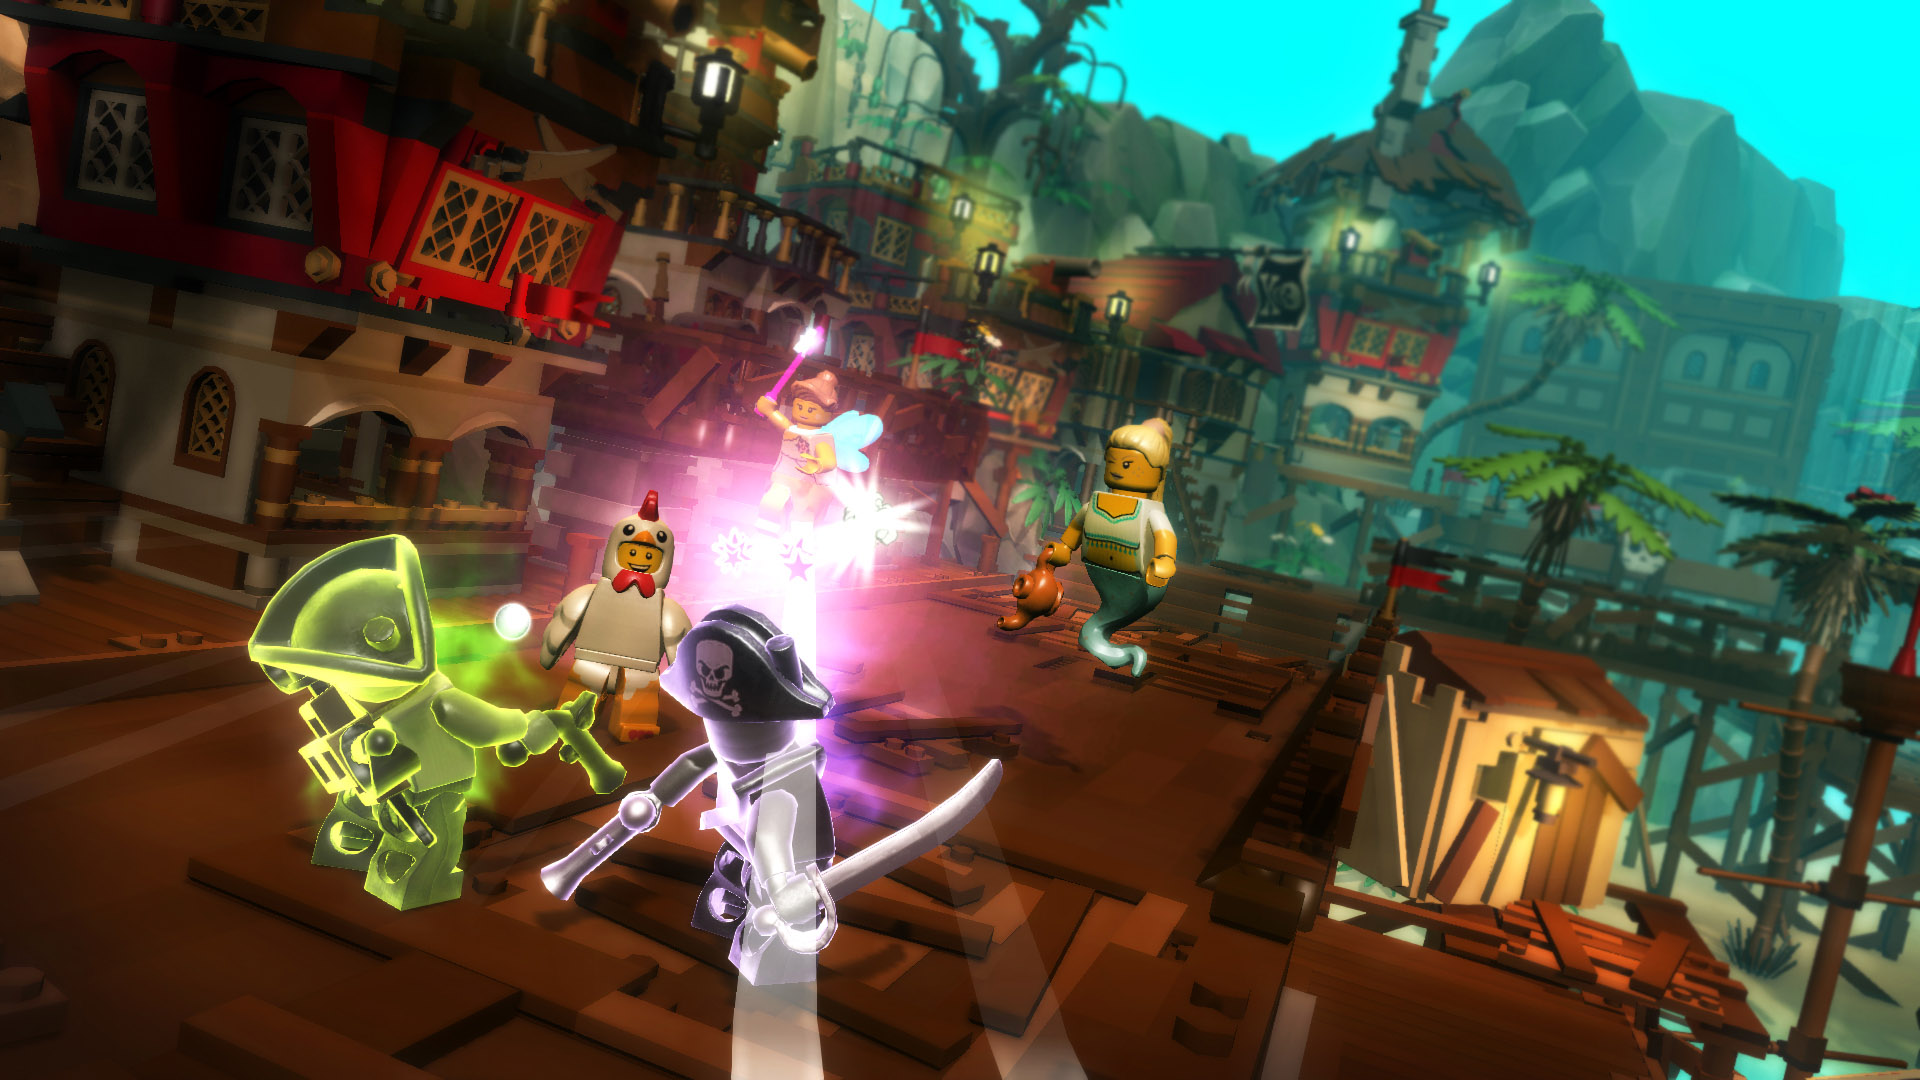 Free-To-Play LEGO Minifigures Online Goes Pay-To-Play